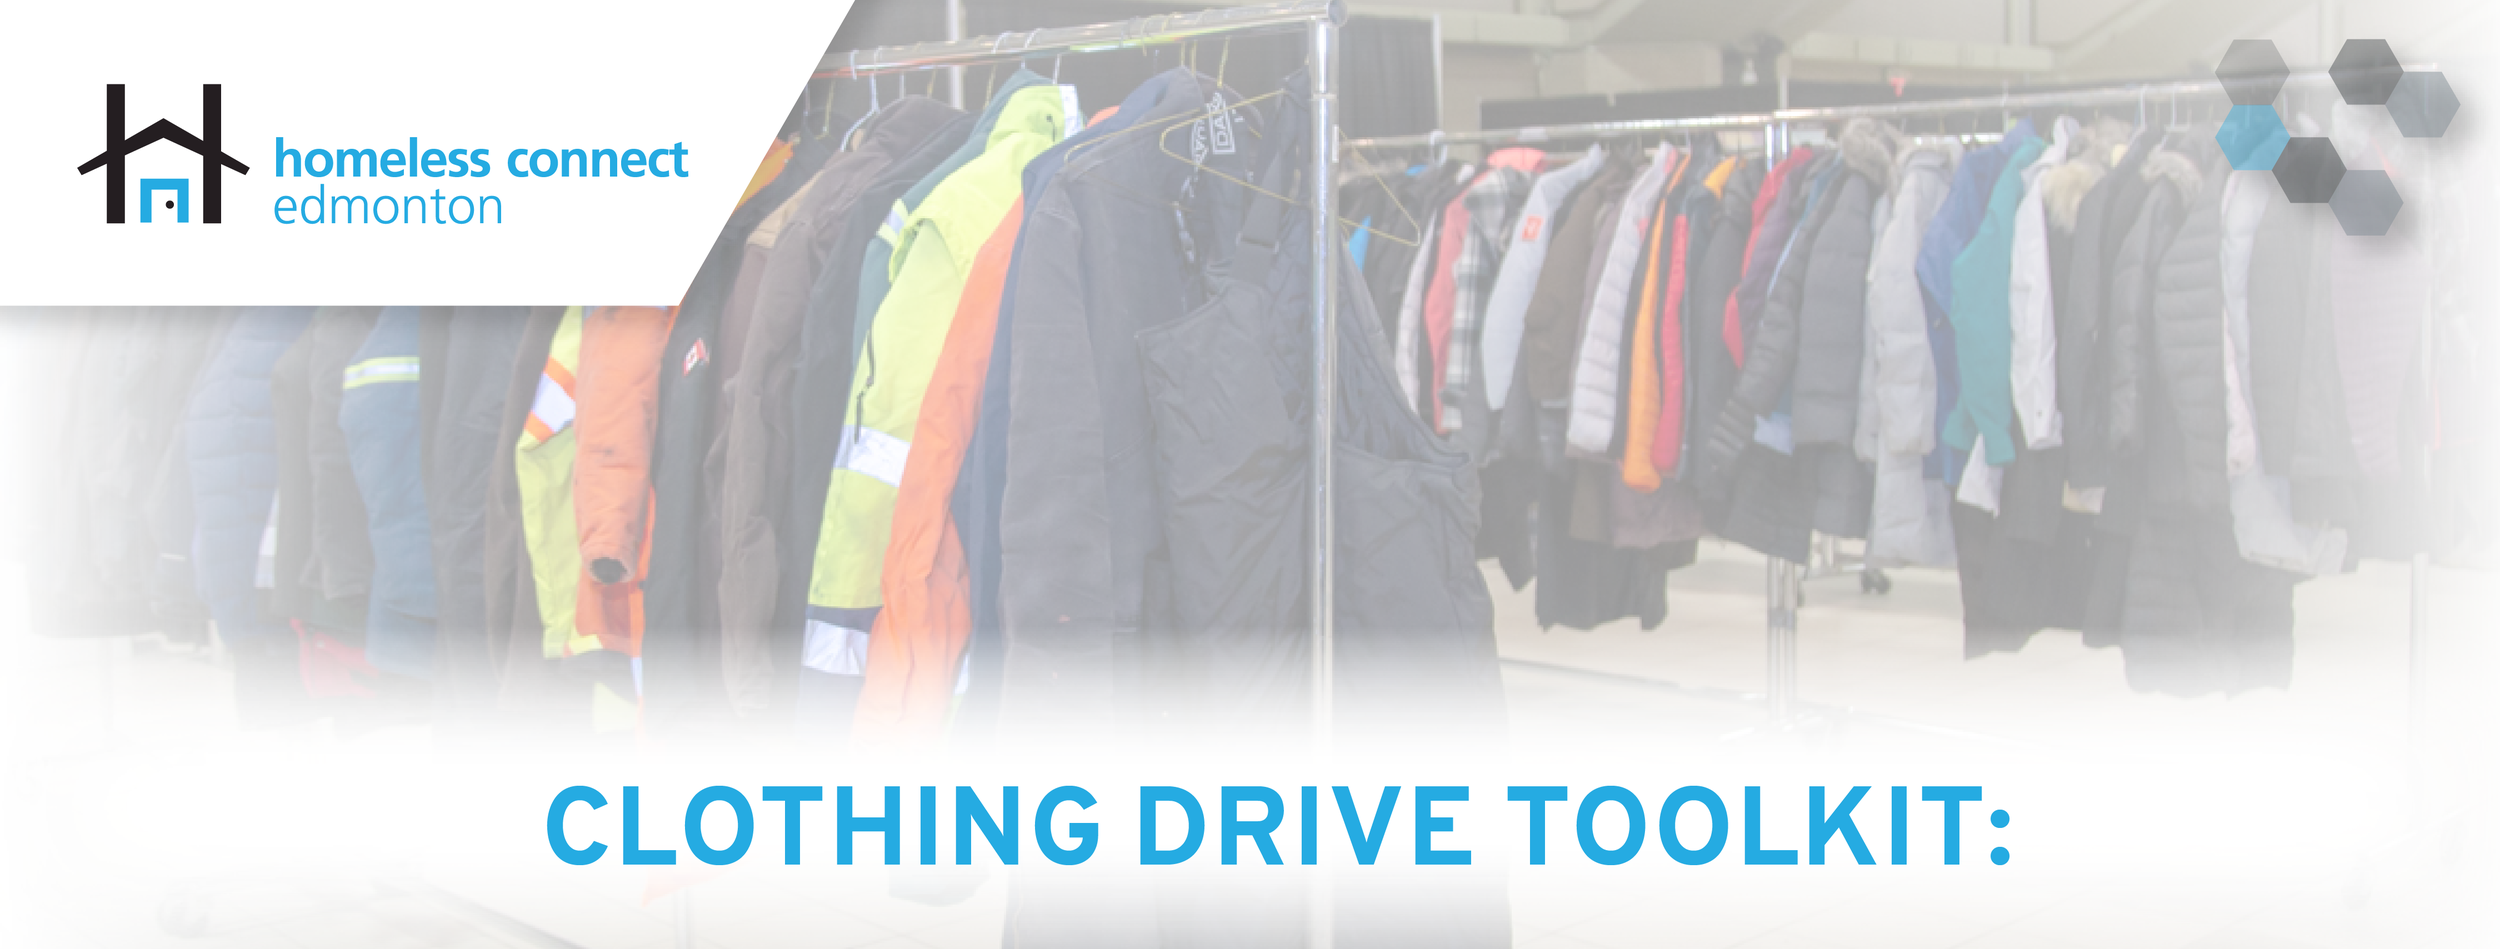 Click HERE for everything you need to organize a clothing drive at your work or in your community for Homeless Connect.